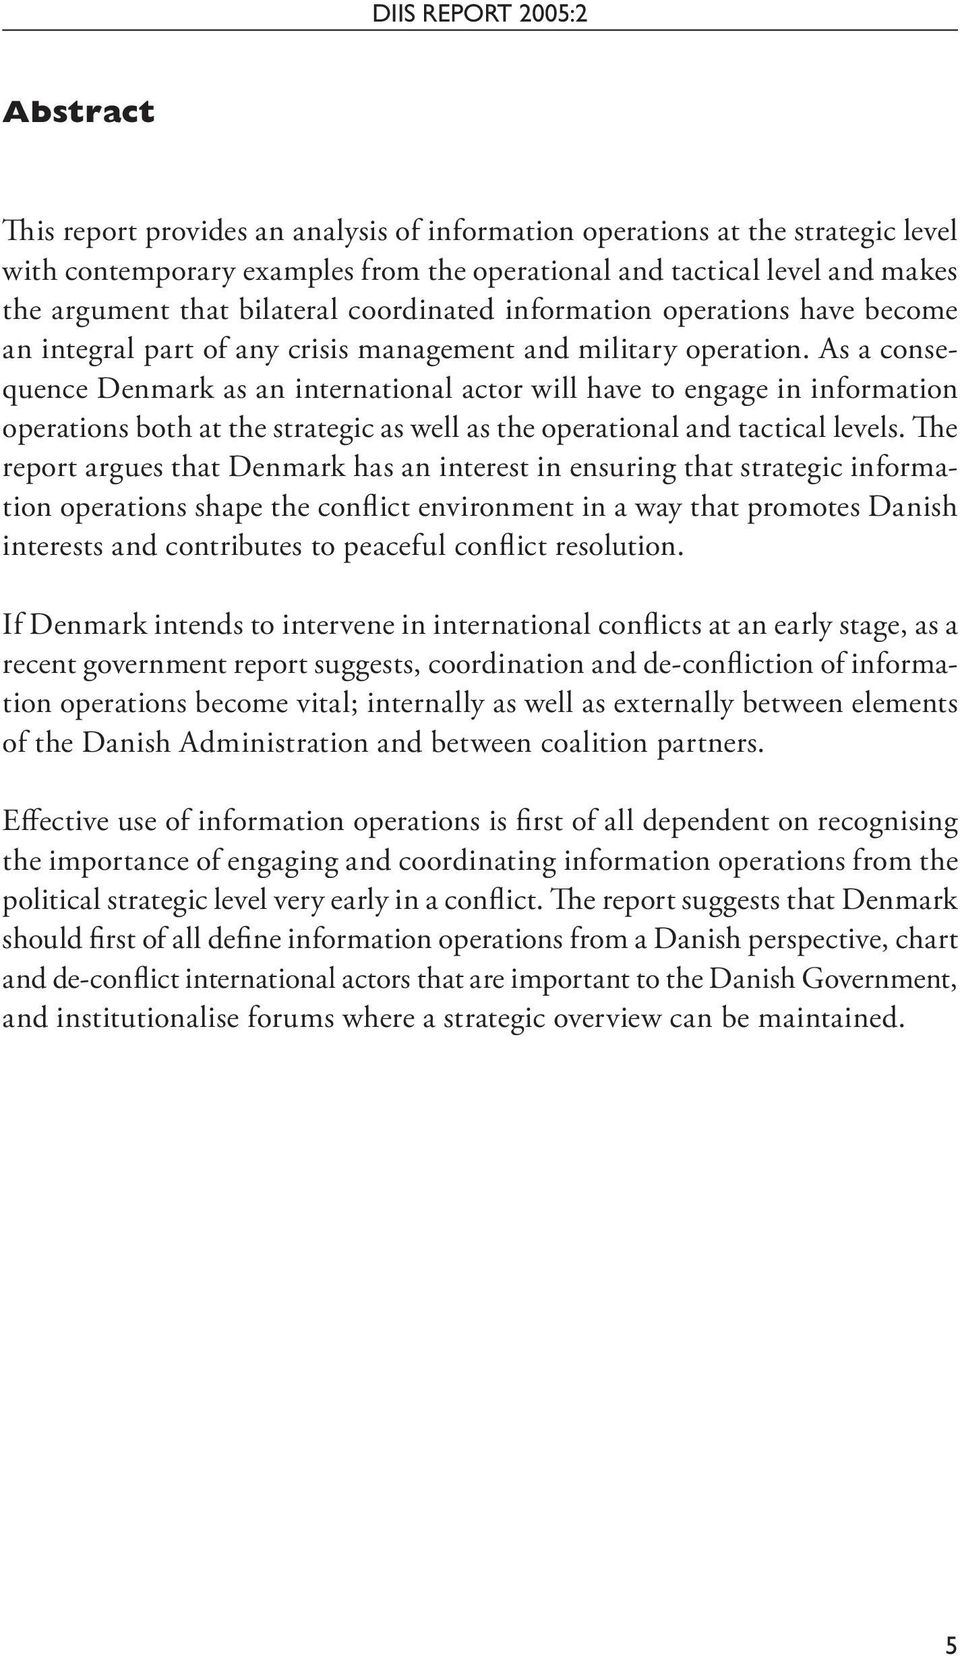 As a consequence Denmark as an international actor will have to engage in information operations both at the strategic as well as the operational and tactical levels.